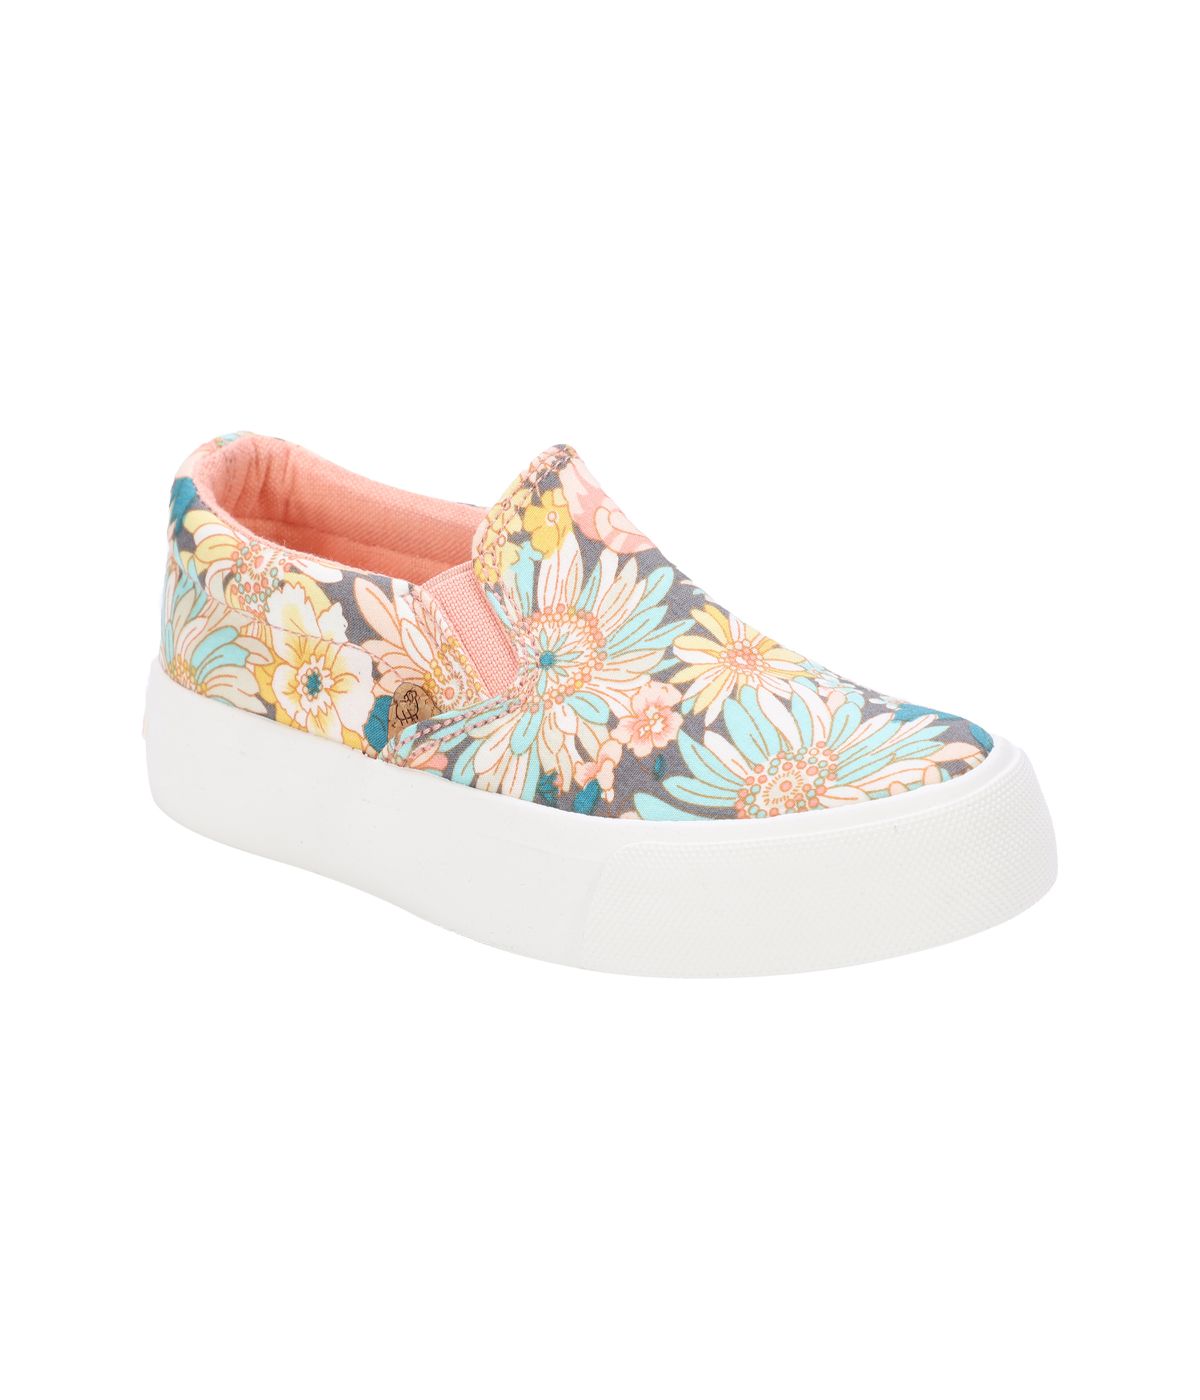 Kid's double gore slip-on casual sneaker with Canvas or PU upper Peach Floral